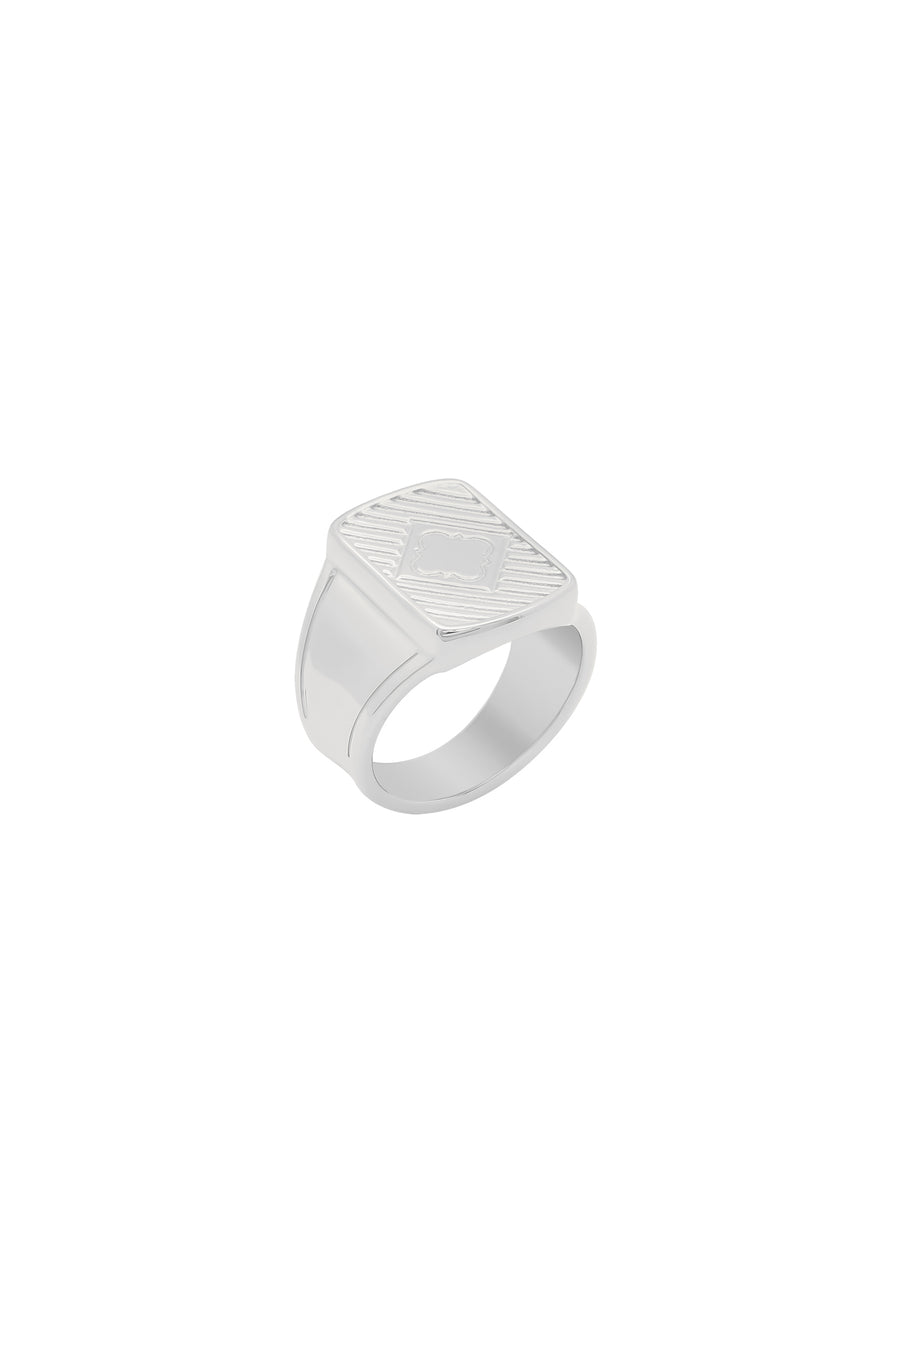 Square Ribbed Men's Silver Signet Ring